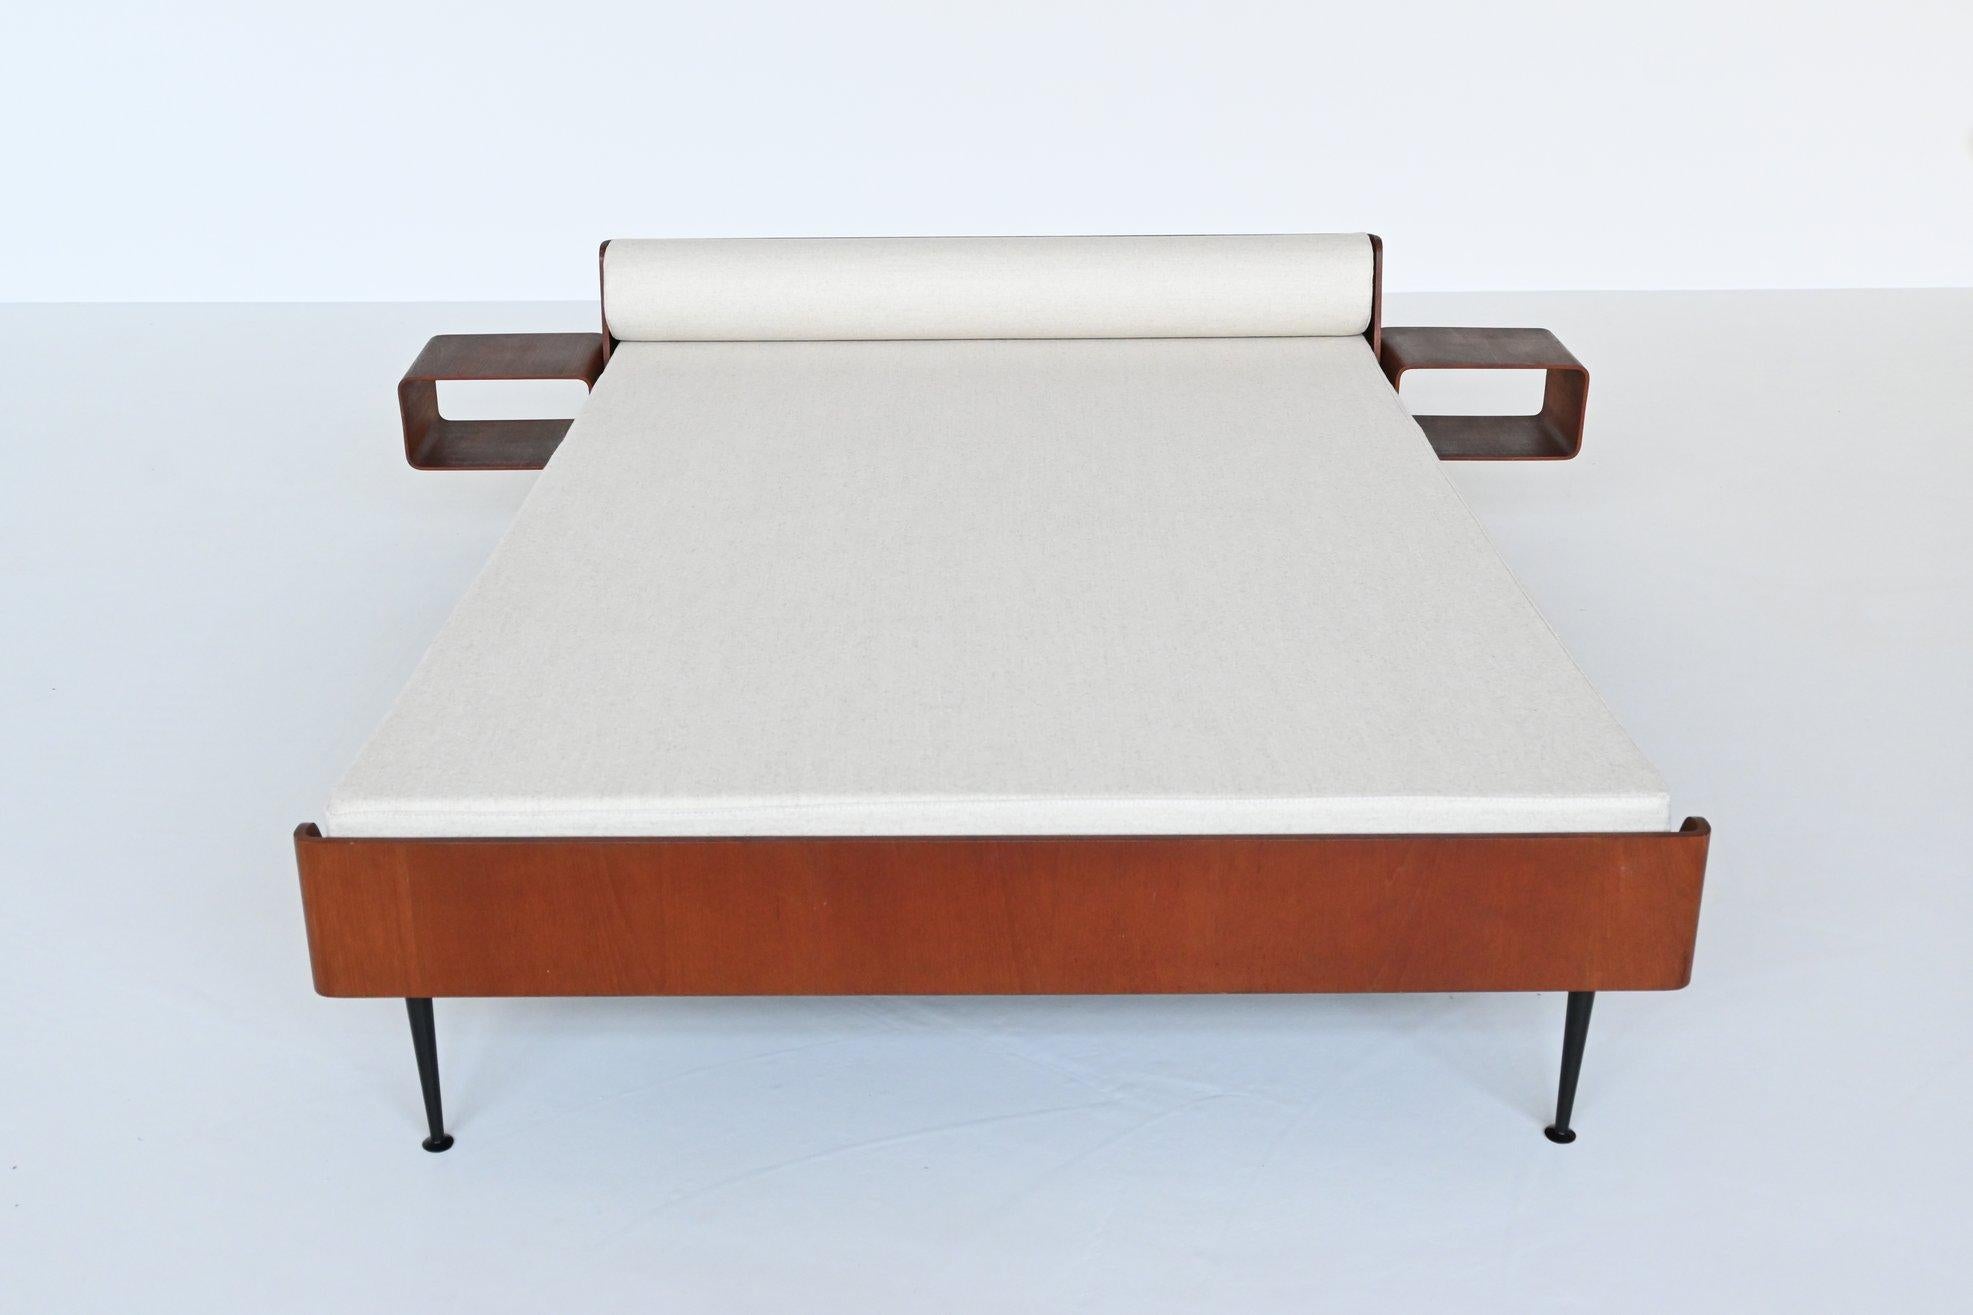 Beautiful shaped double bed from the Euroika series designed by Friso Kramer for Auping, The Netherlands 1963. Friso Kramer designed also from this series: bed, bed cabinets, table, chair, mirror and a toilet cabinet. This bed has a black coated